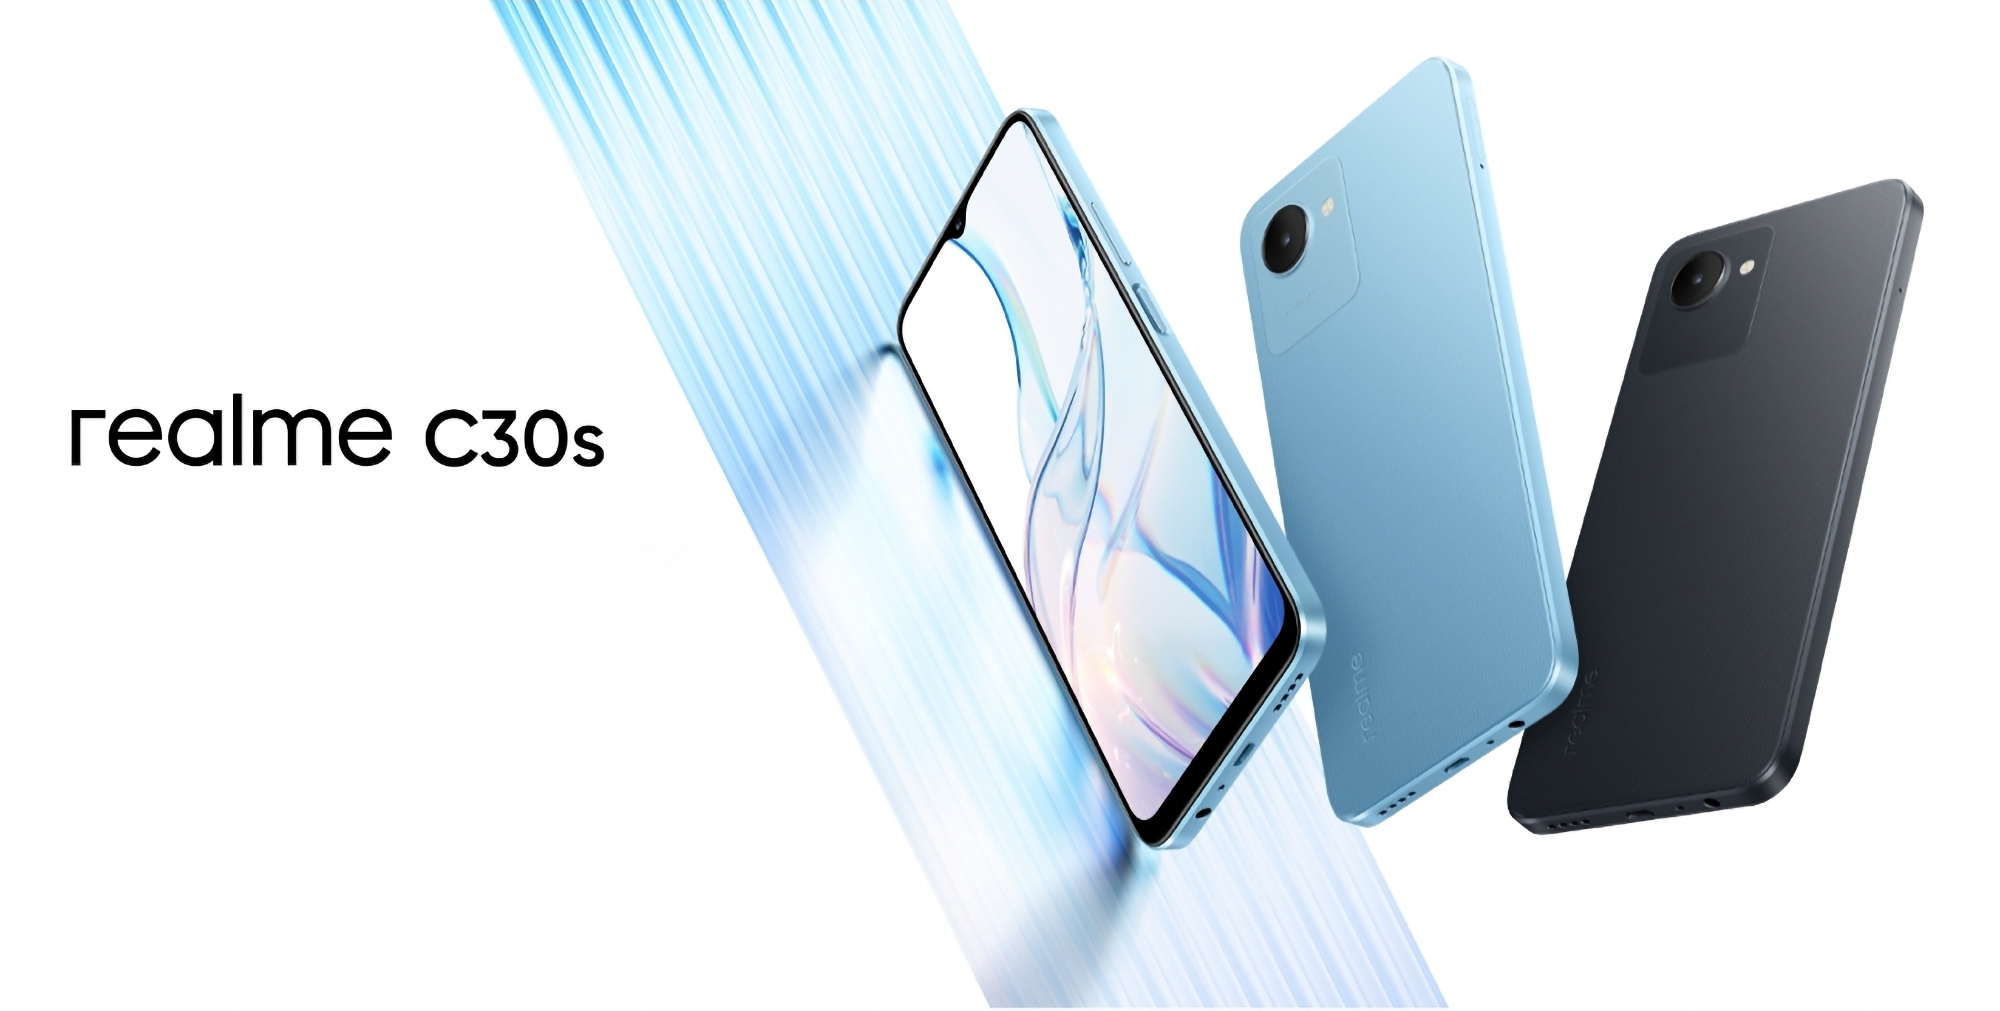 realme C30s: $95 smartphone with side scanner fingerprints, microSD slot and Android 12 Go Edition on board